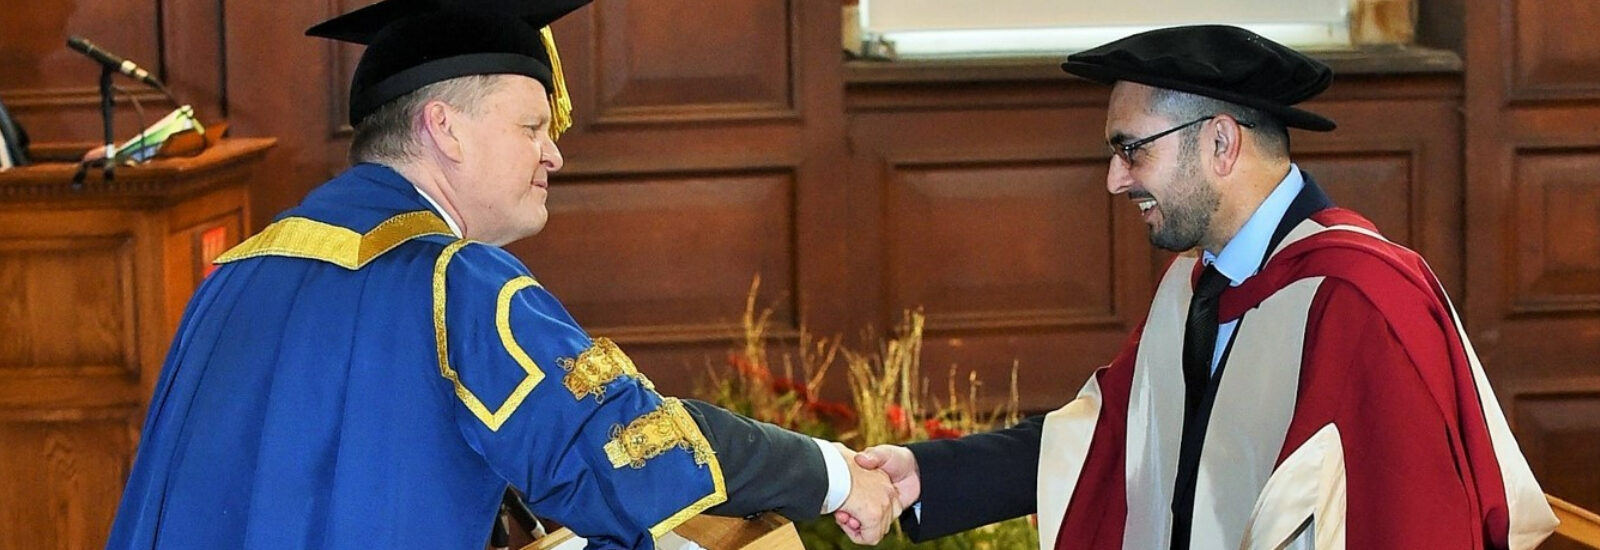 Imran shaking the Vice-Chancellor's hand on his graduation from the University of Reading